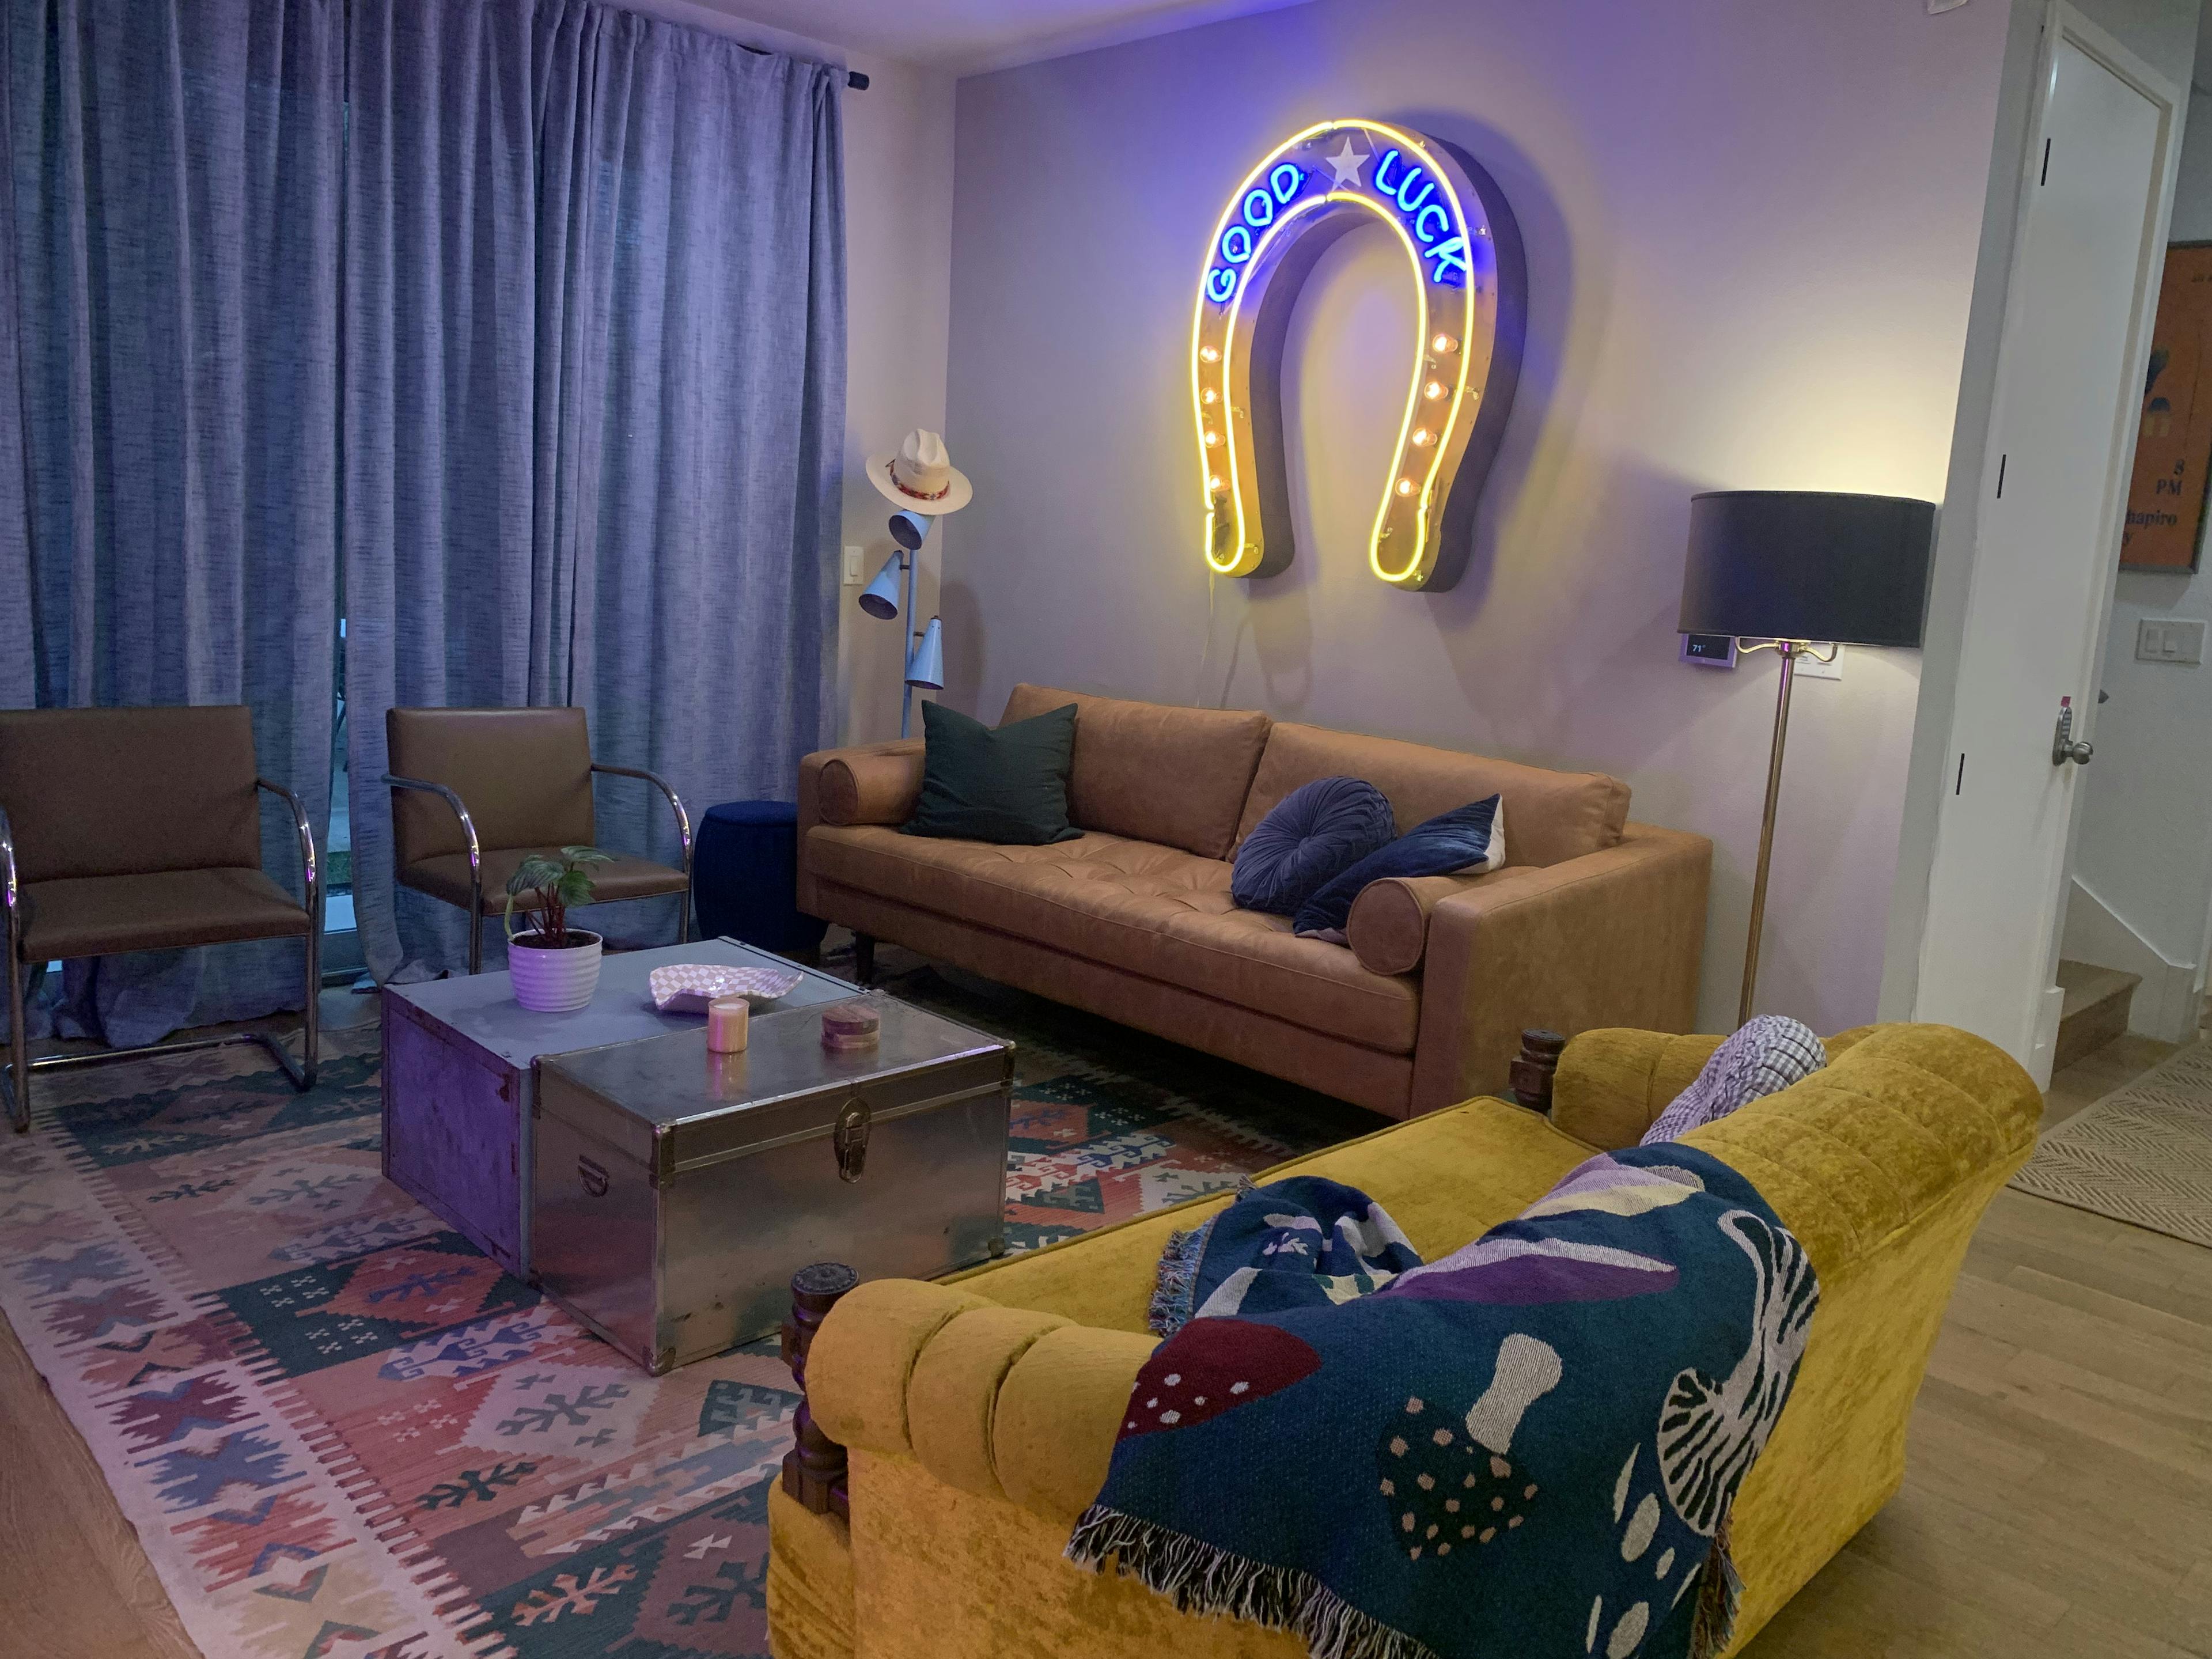 Two couches and chairs sit around a coffee table with a neon horseshoe with the text "Good luck" on the wall